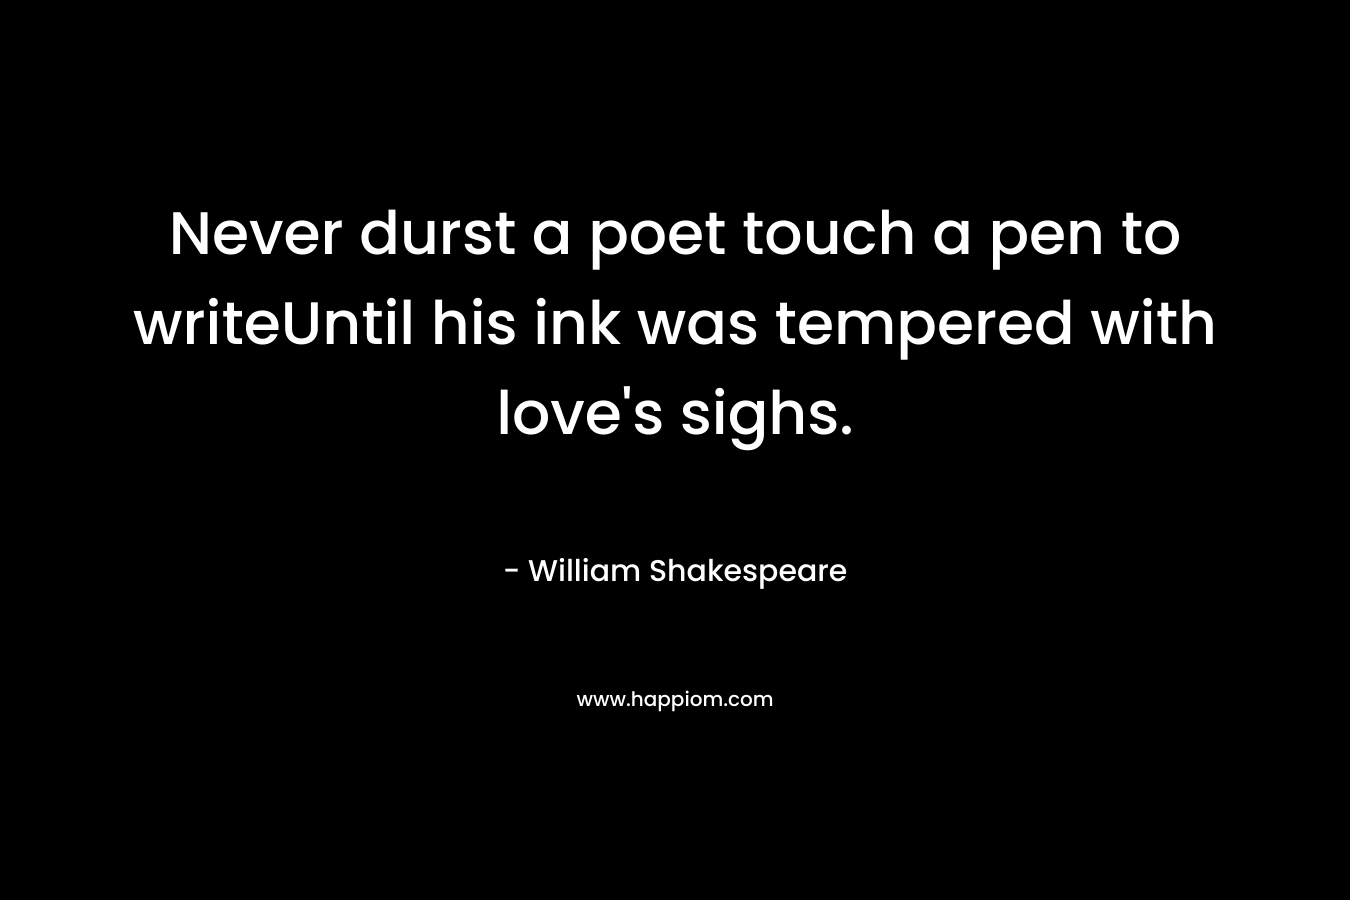 Never durst a poet touch a pen to writeUntil his ink was tempered with love’s sighs. – William Shakespeare